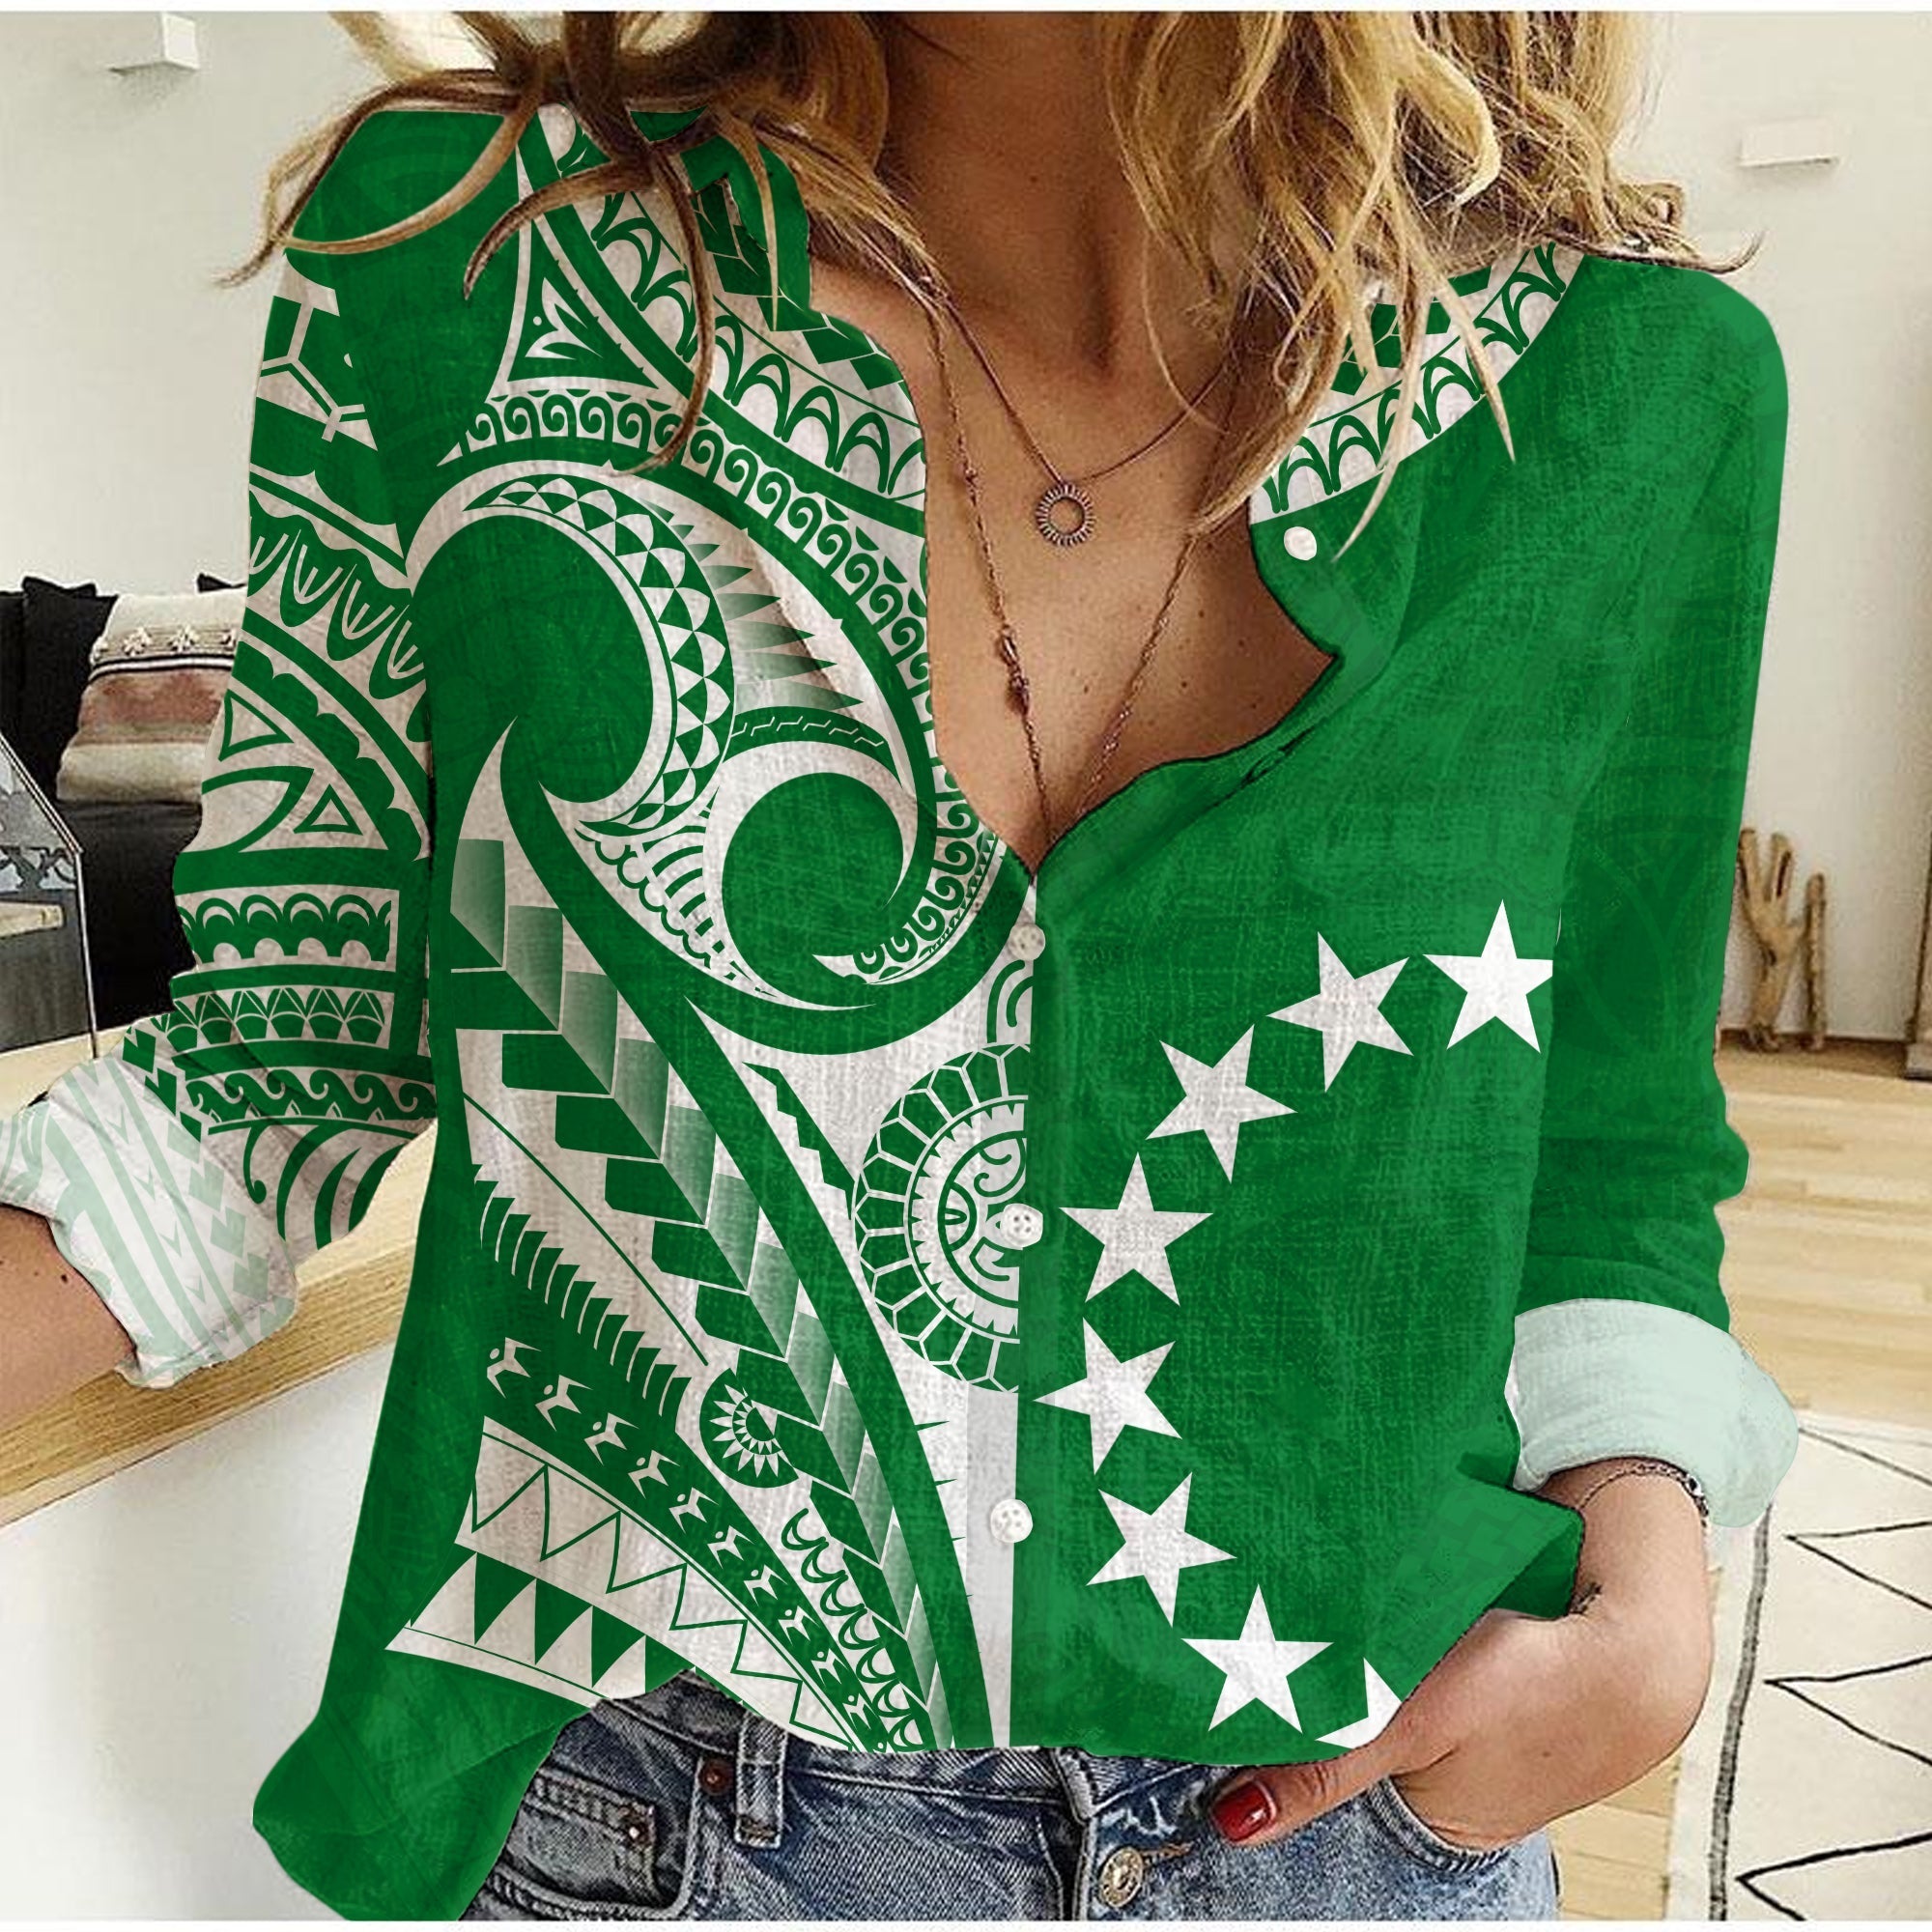 custom-text-and-number-cook-islands-tatau-women-casual-shirt-symbolize-passion-stars-version-green